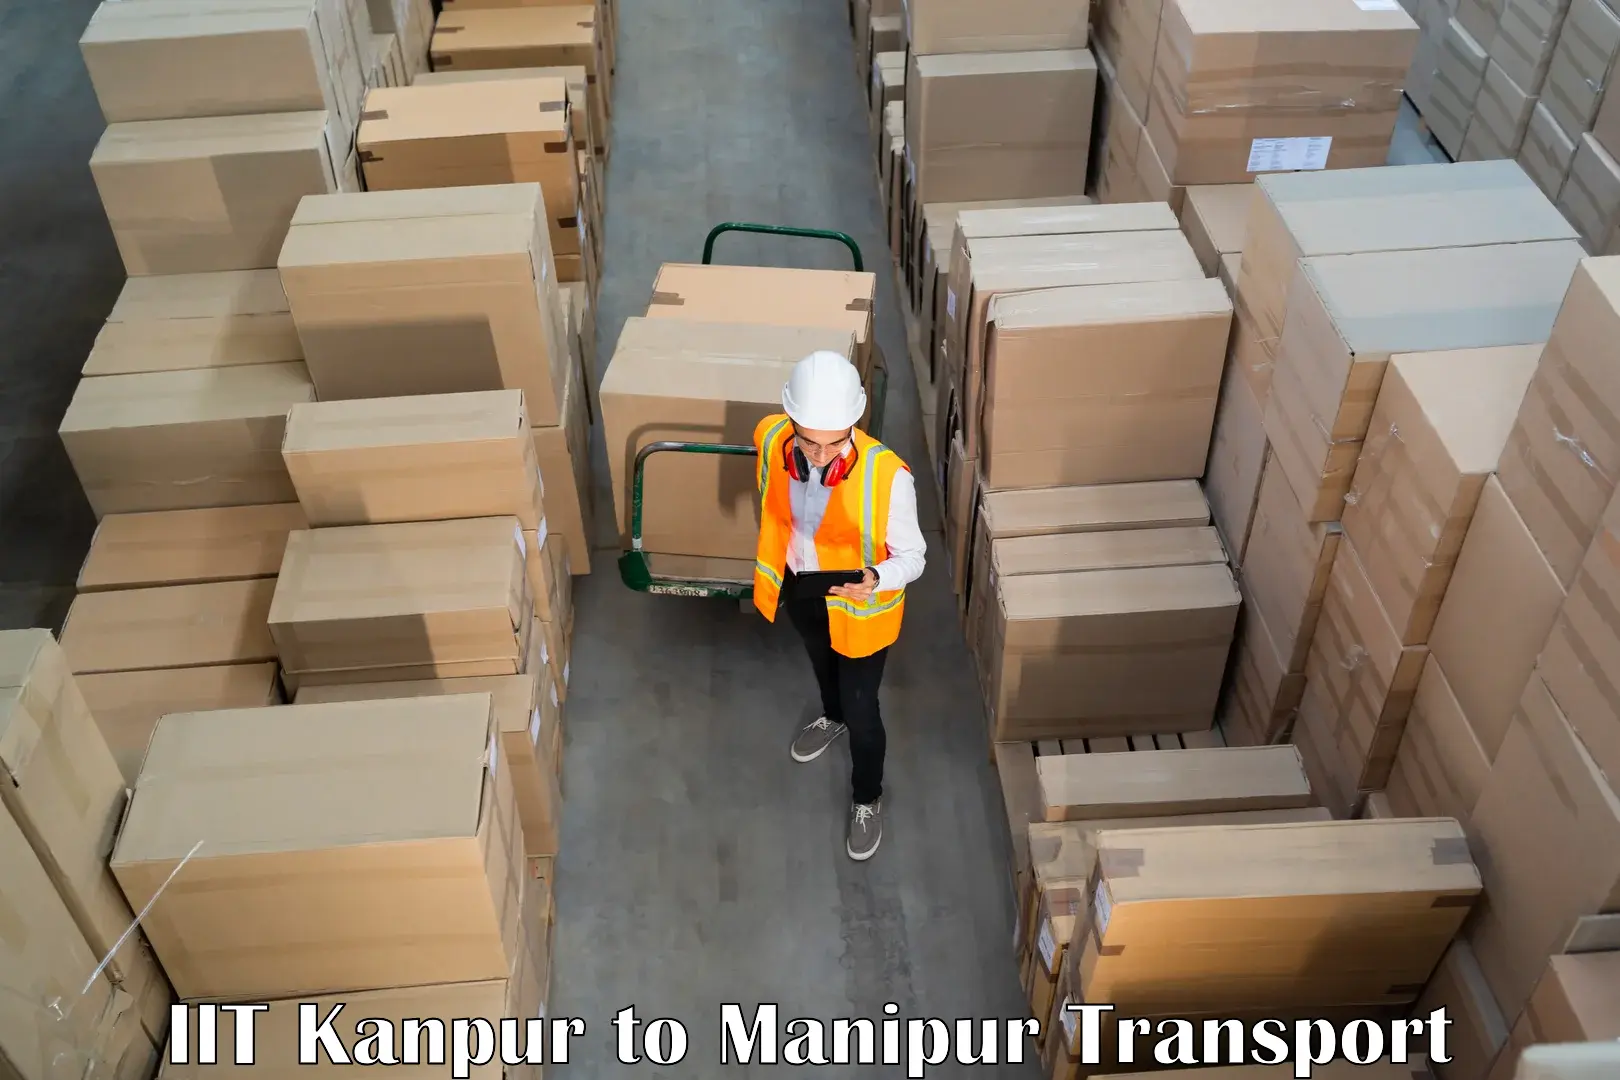 Daily parcel service transport IIT Kanpur to Imphal